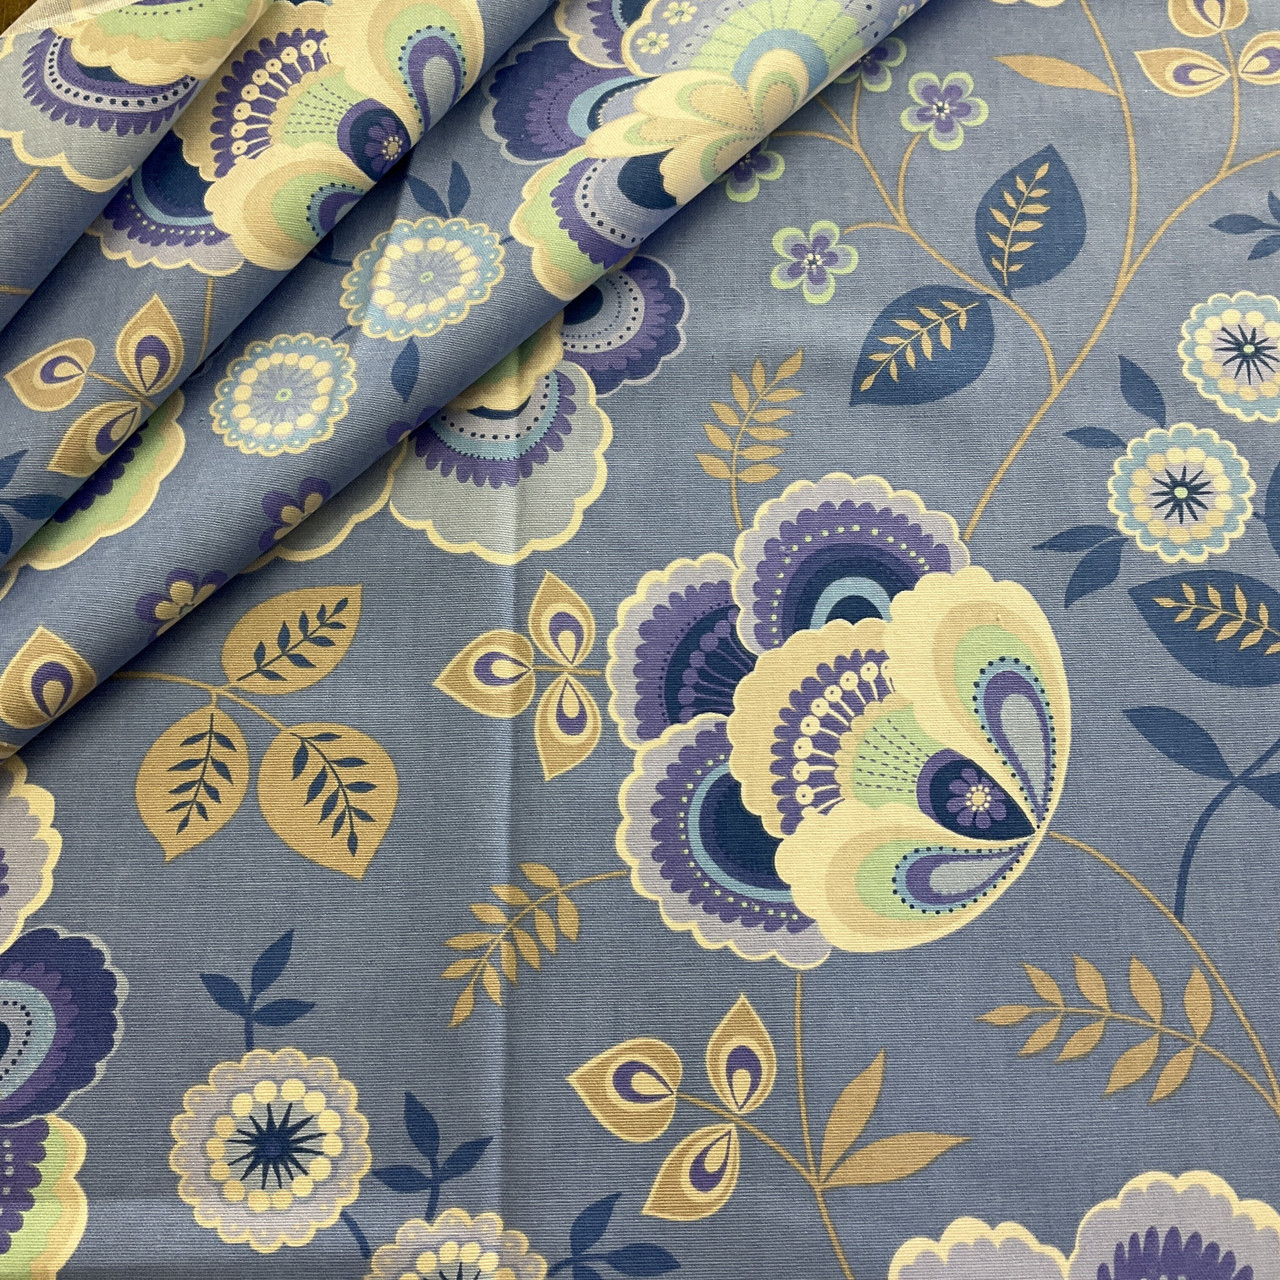 Ink Blue Jacobean Floral Toile Fabric | 100% Cotton Fabric 58”W